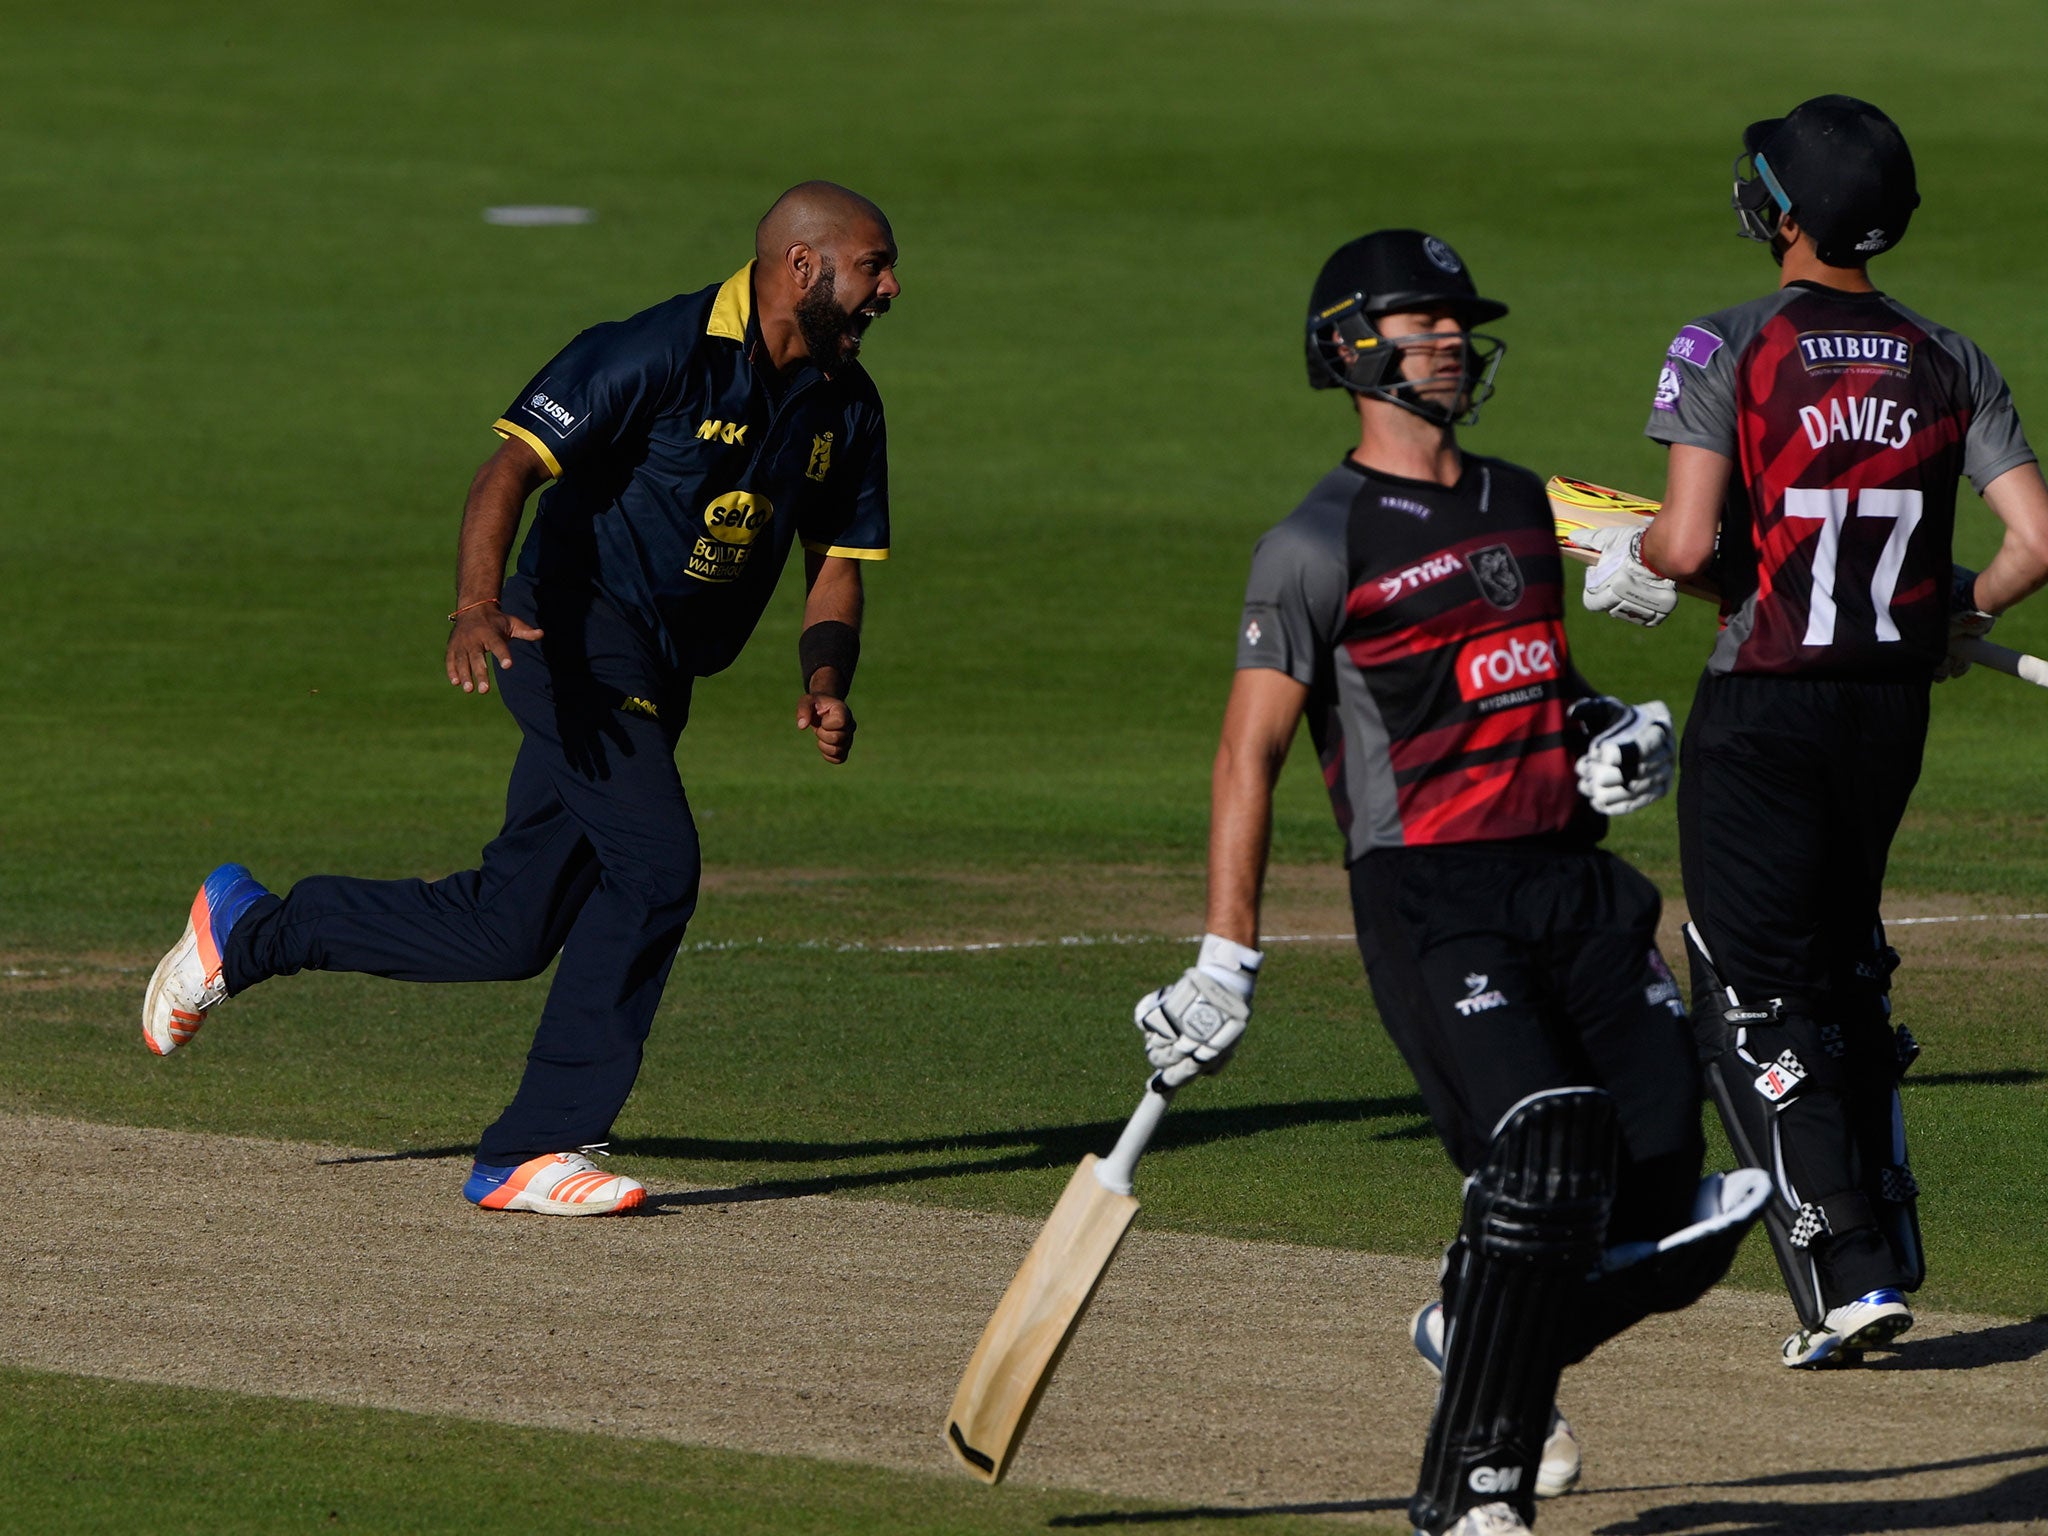 Jeetan Patel celebrates yet another wicket as he leads Warwickshire to victory